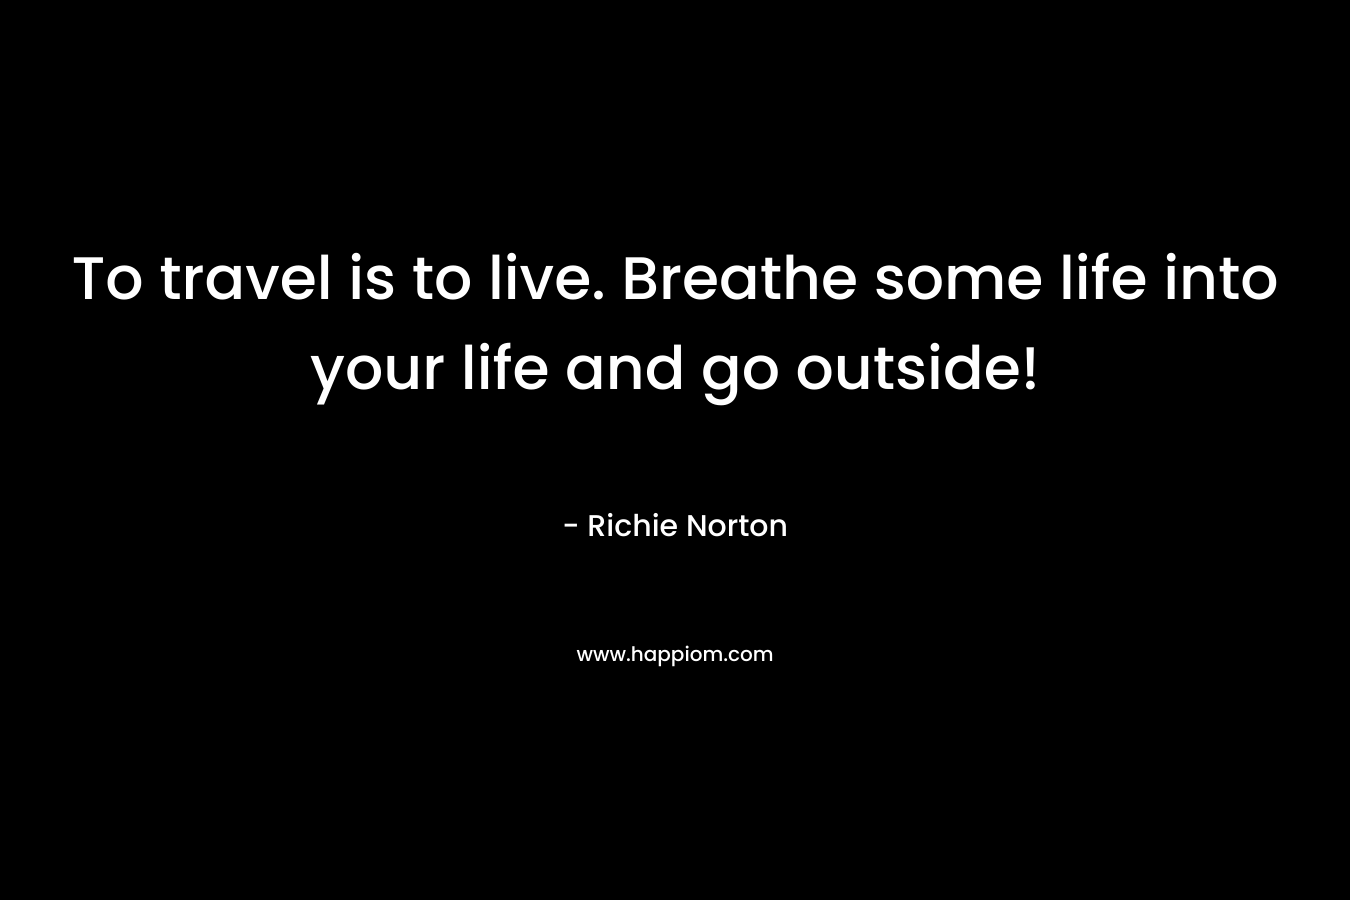 To travel is to live. Breathe some life into your life and go outside!